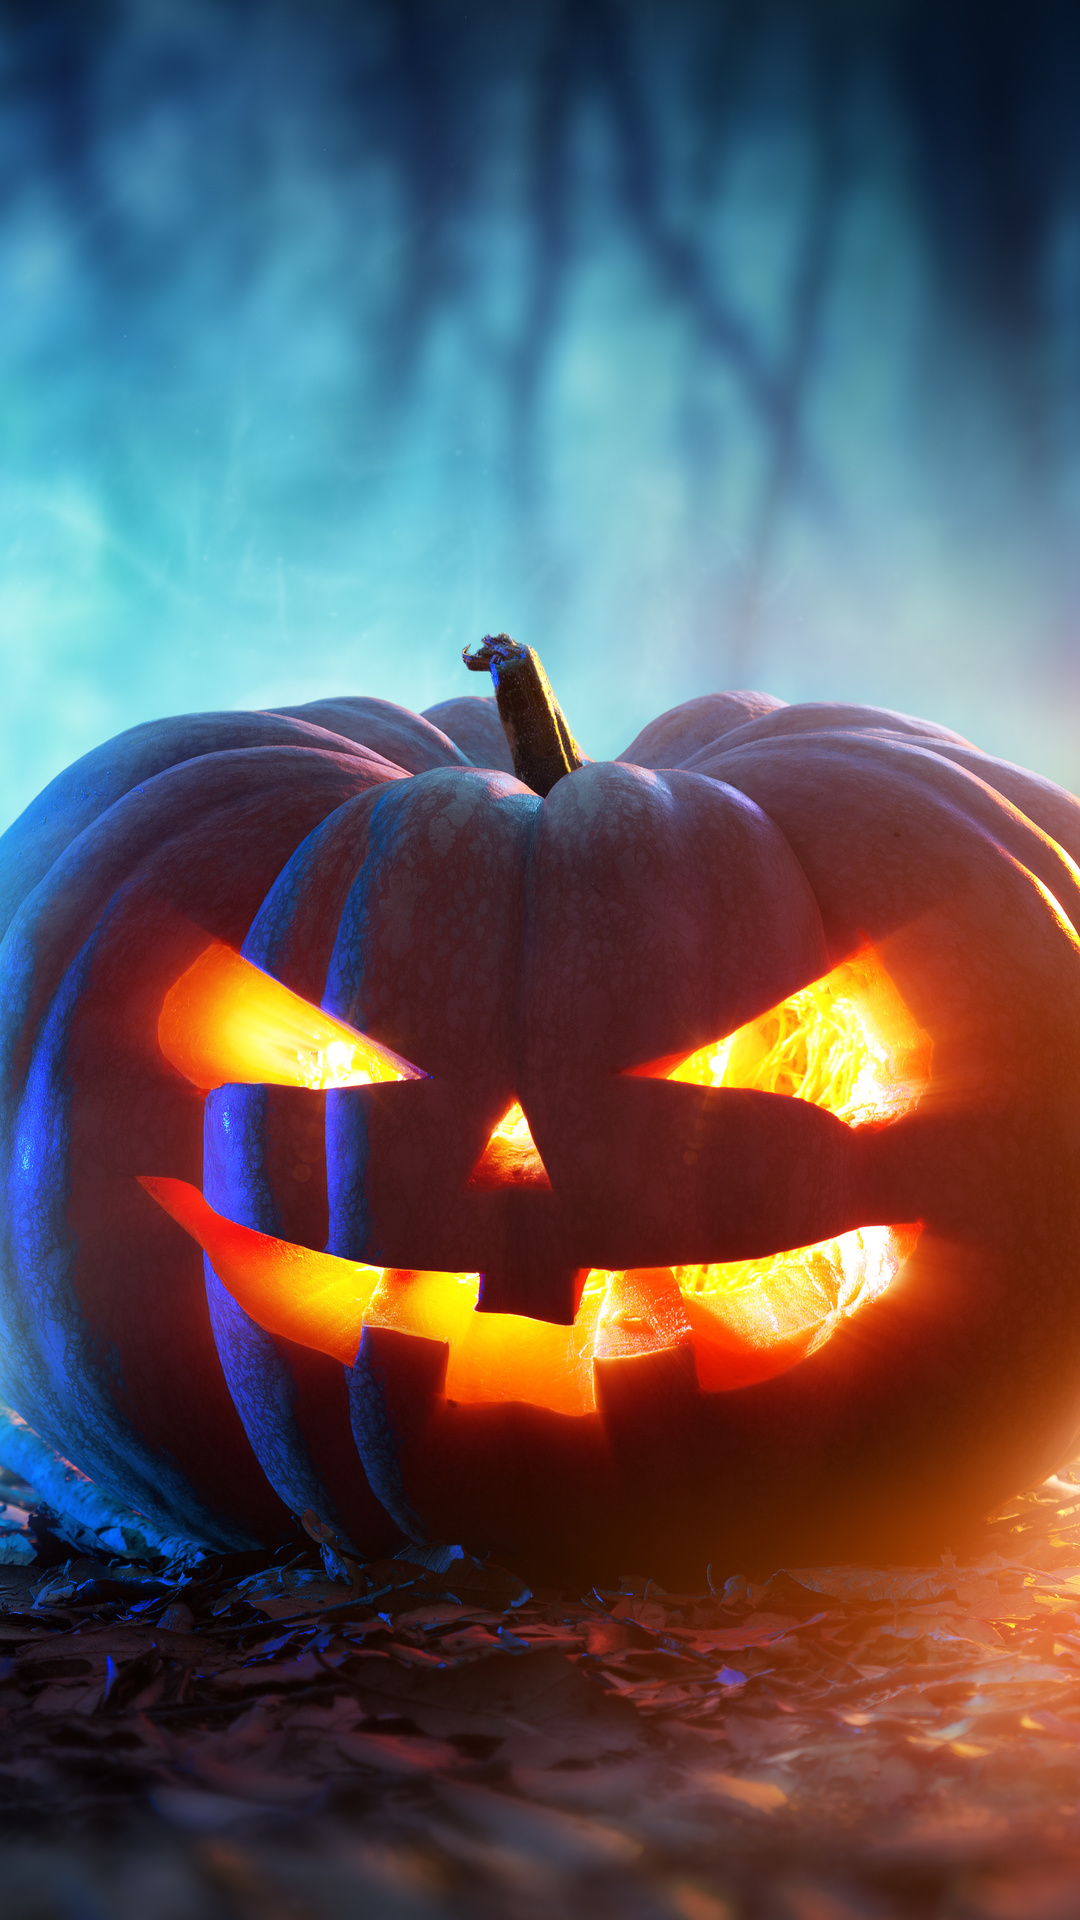 New HalloweenK wallpaper, free and easy to download